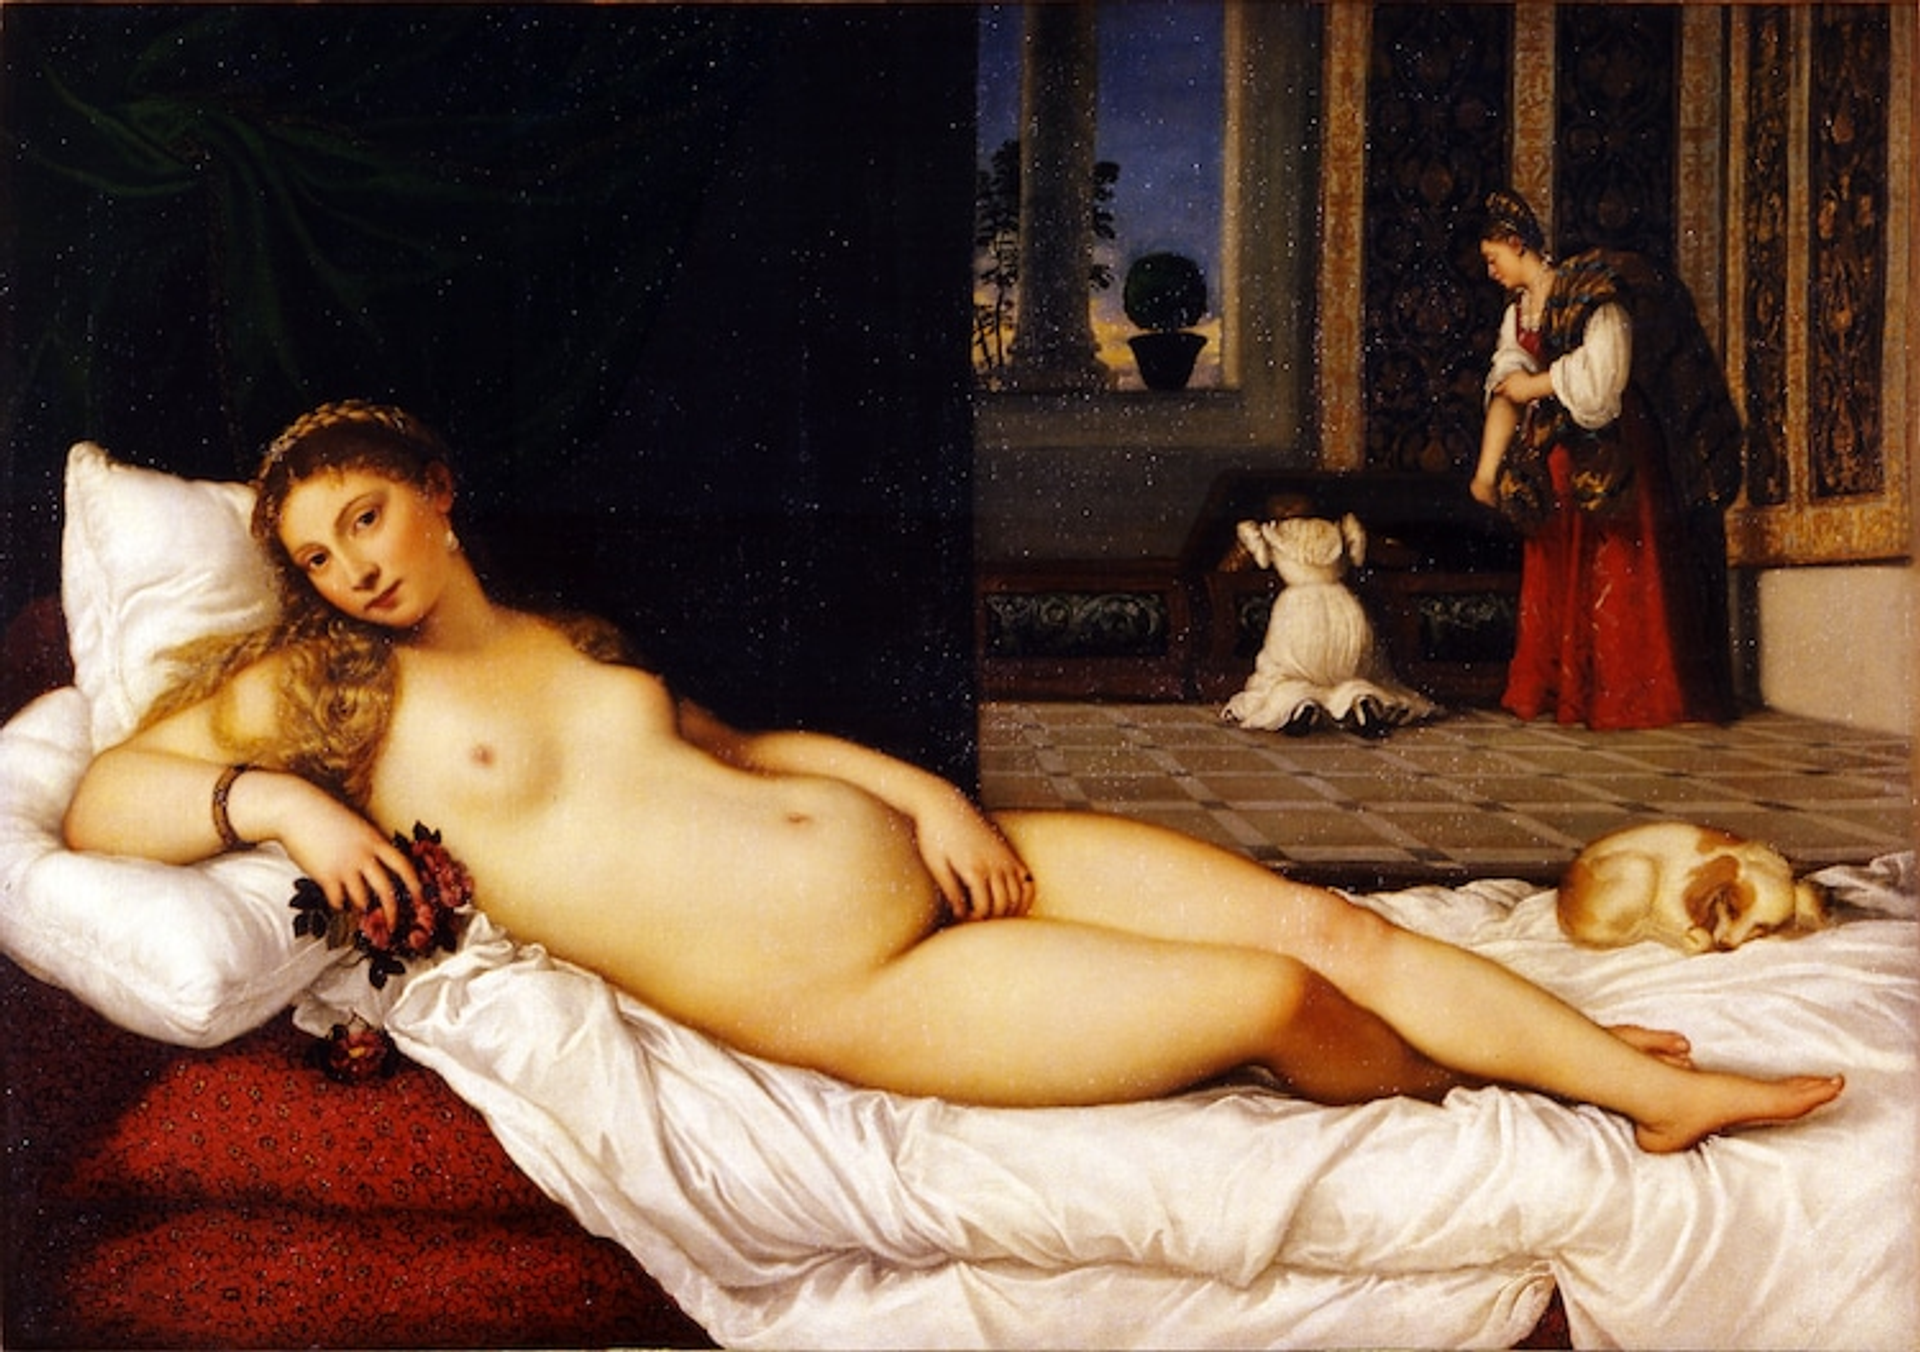 Titian’s Venus of Urbino. A nude woman lying on her bed with a dog. She has servants in the background